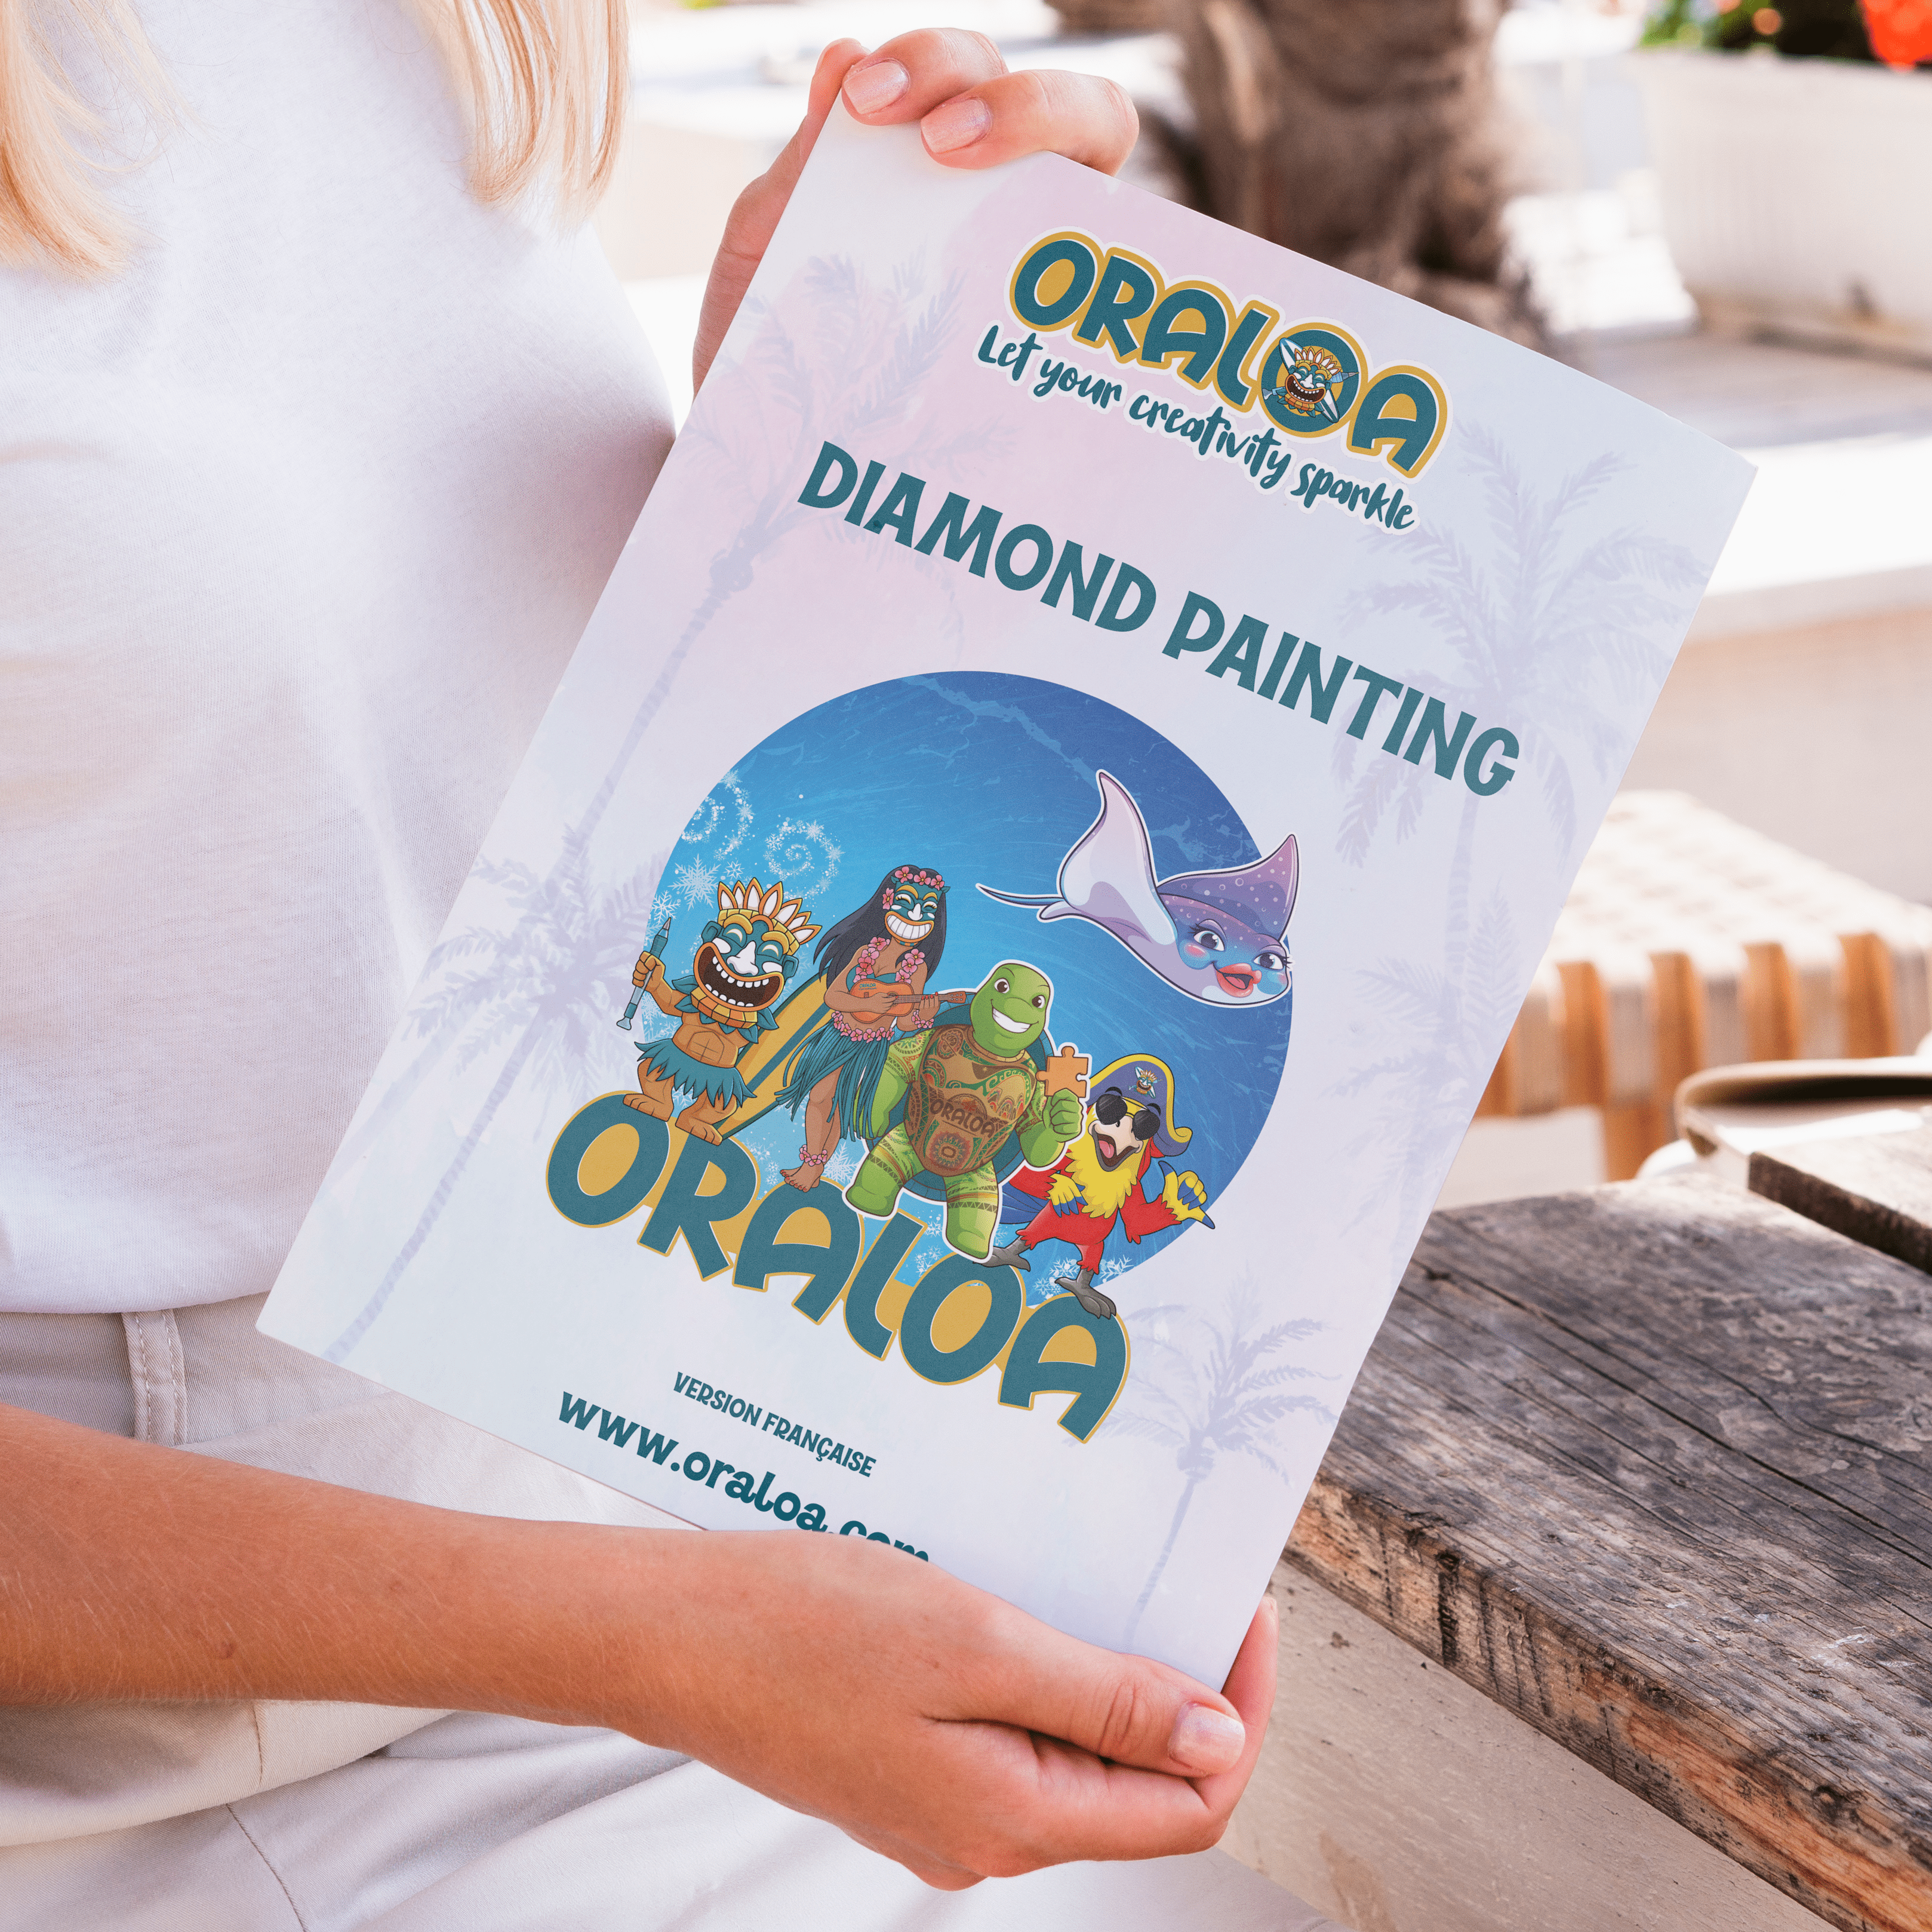 Diamond Painting Activity Booklet in French Oraloa.